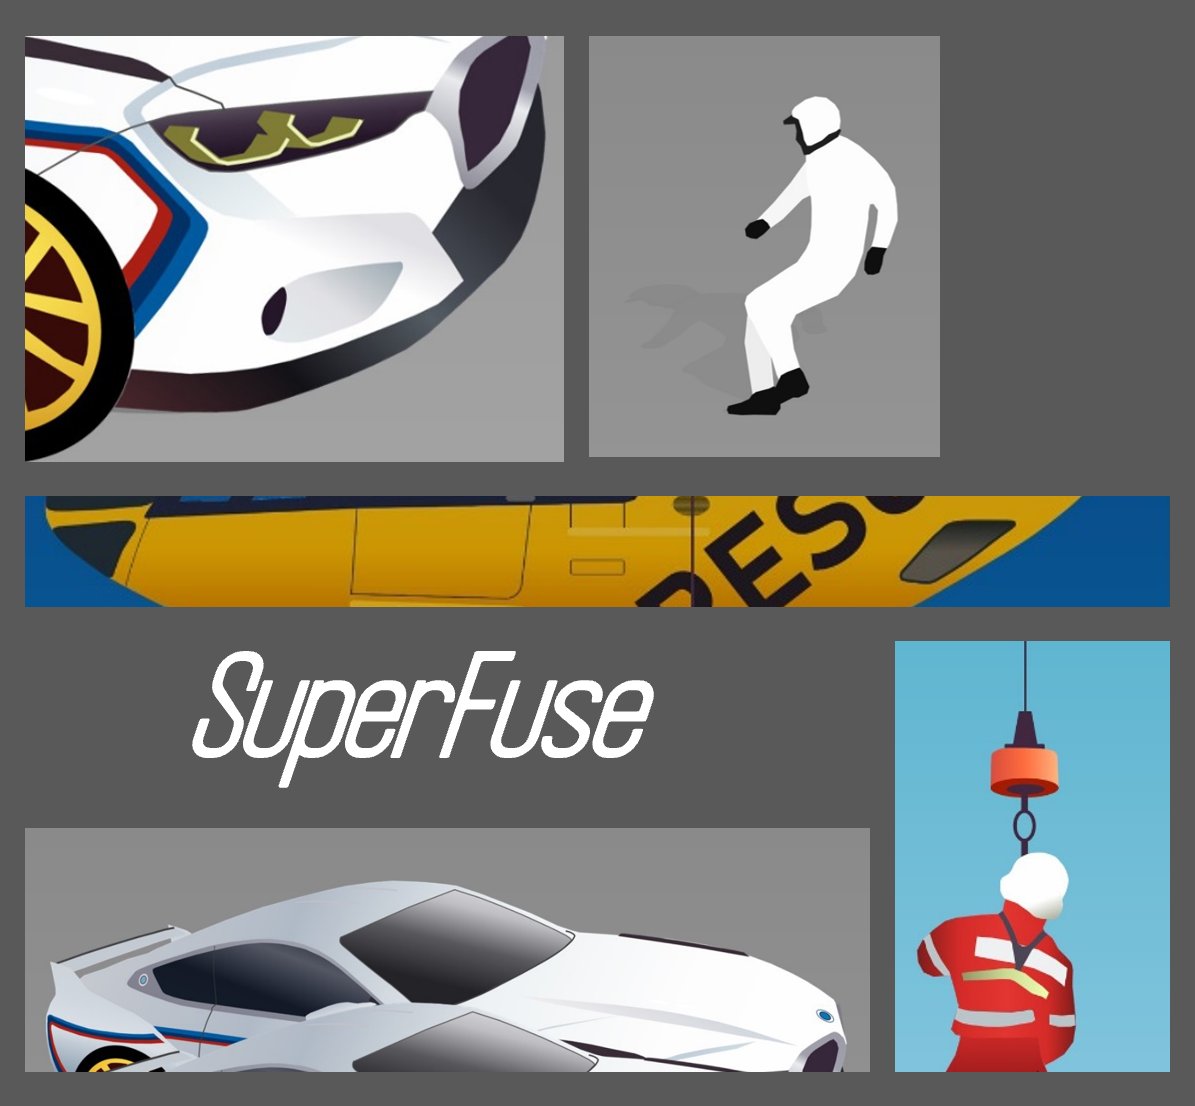 Here are some excerpts from the work on the NFTs “SuperFuse”.

#nft #nftart #nftartist #nfts #nftcollector #nftcommunity #cryptoart #cryptoartist #nftanimation #NFTs #openseanft #raribleNFT #OrdinalsNFT #SolanaNFT